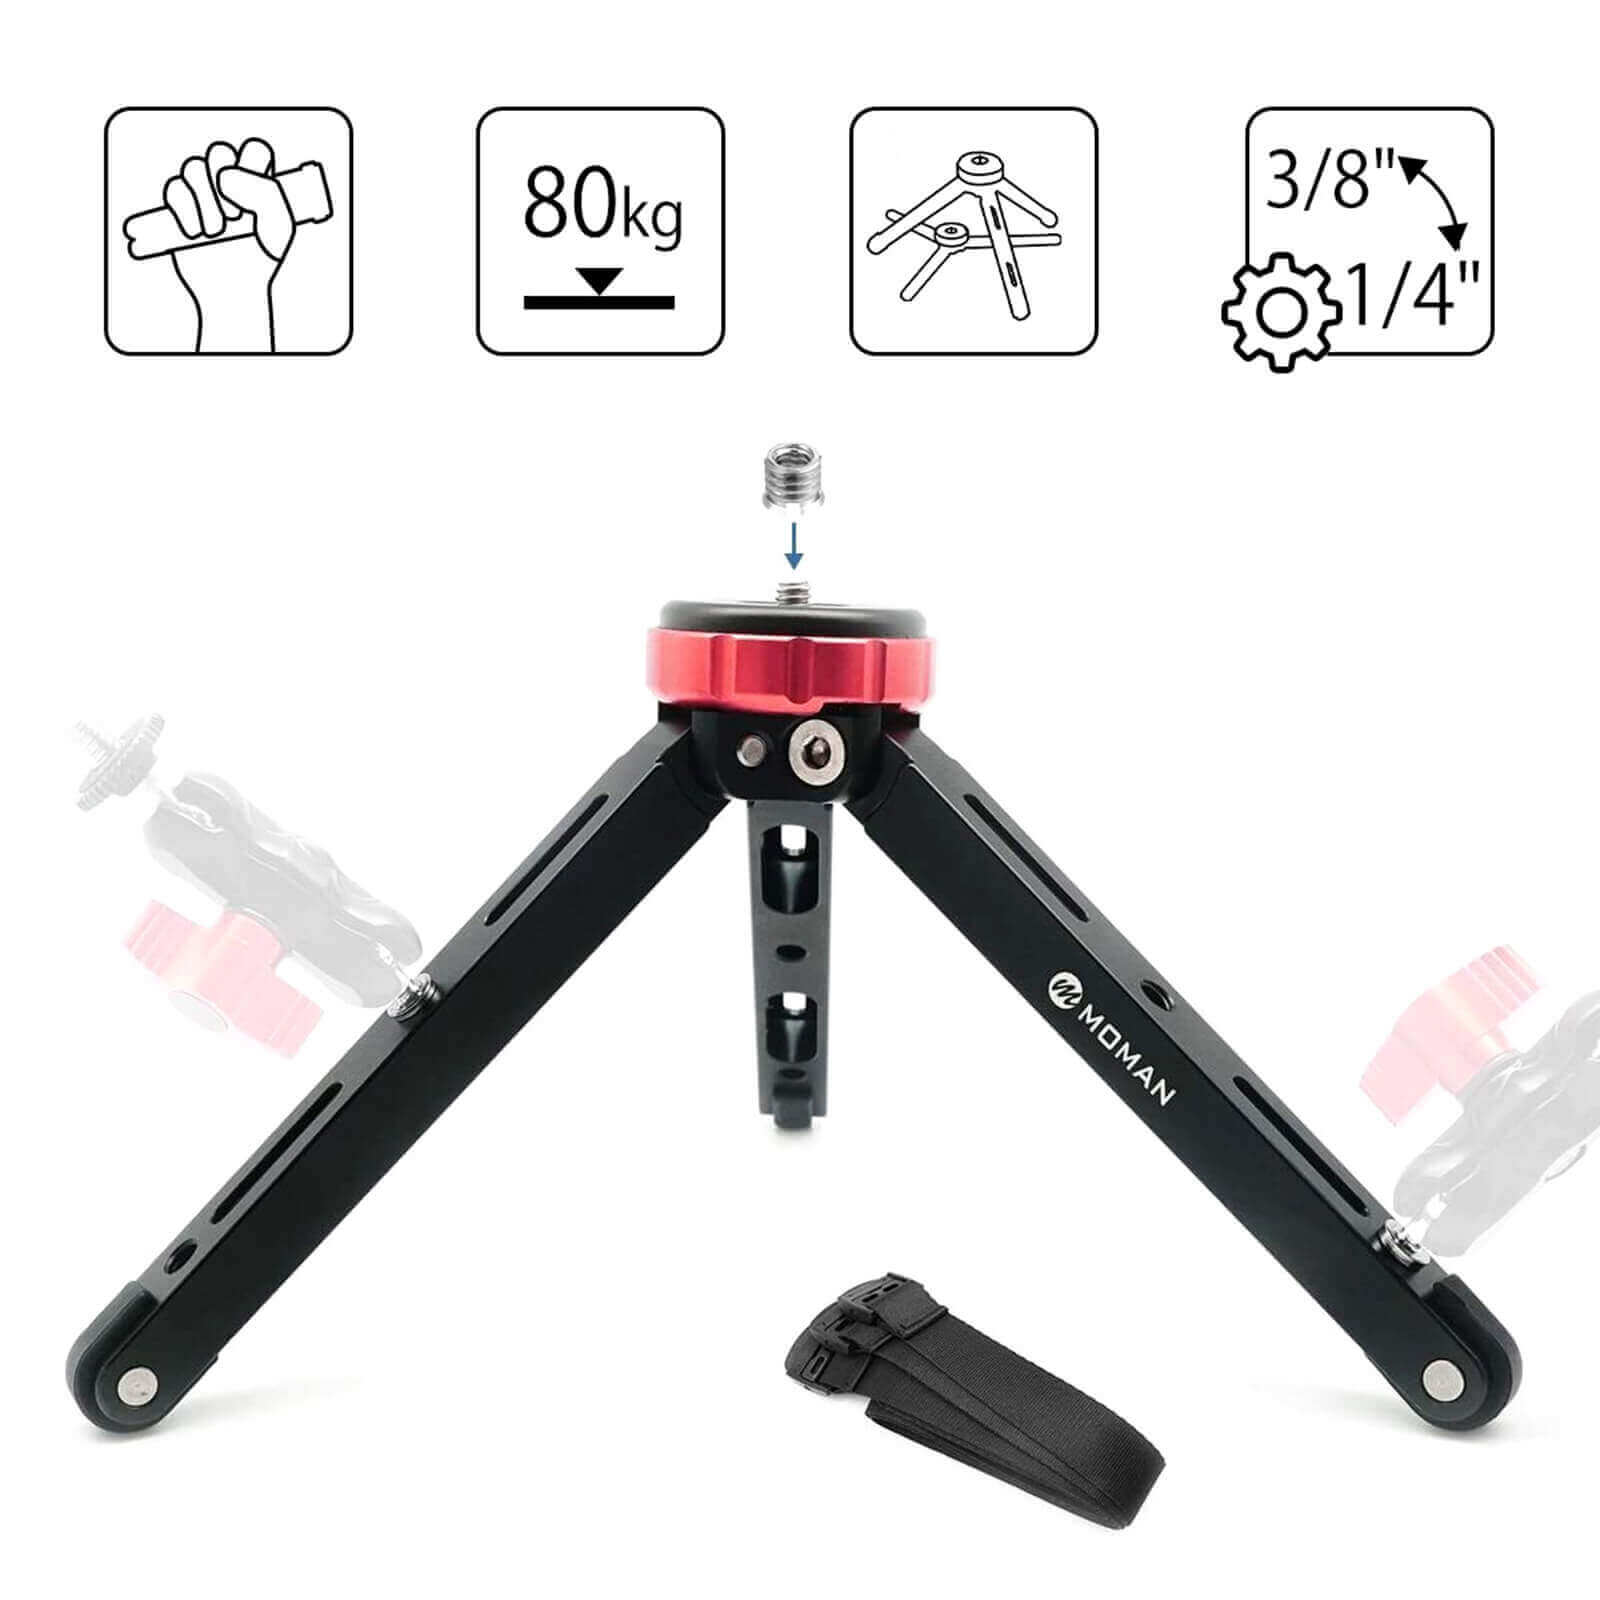 Moman TR1 mini tripod features anti-slip design for better holding and a max payload of 80kg